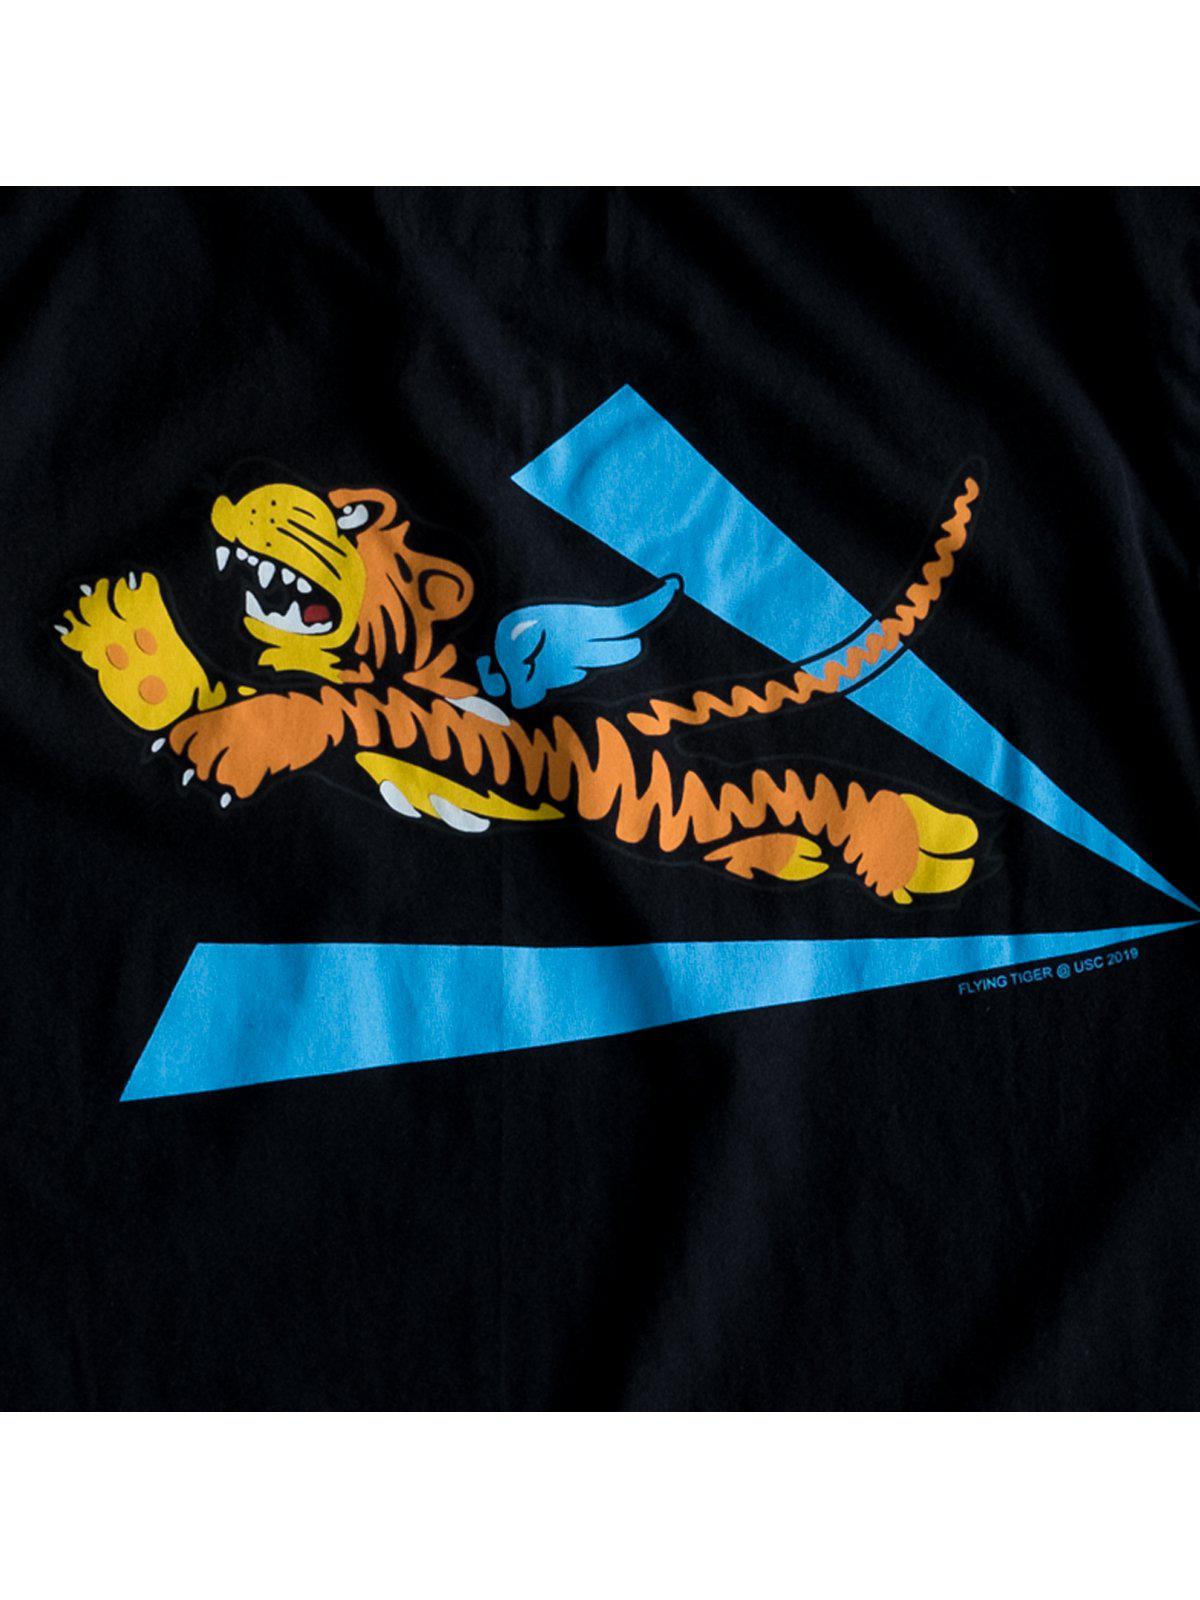 US Comp4ny Flying Tiger II Tees Black - MORE by Morello Indonesia